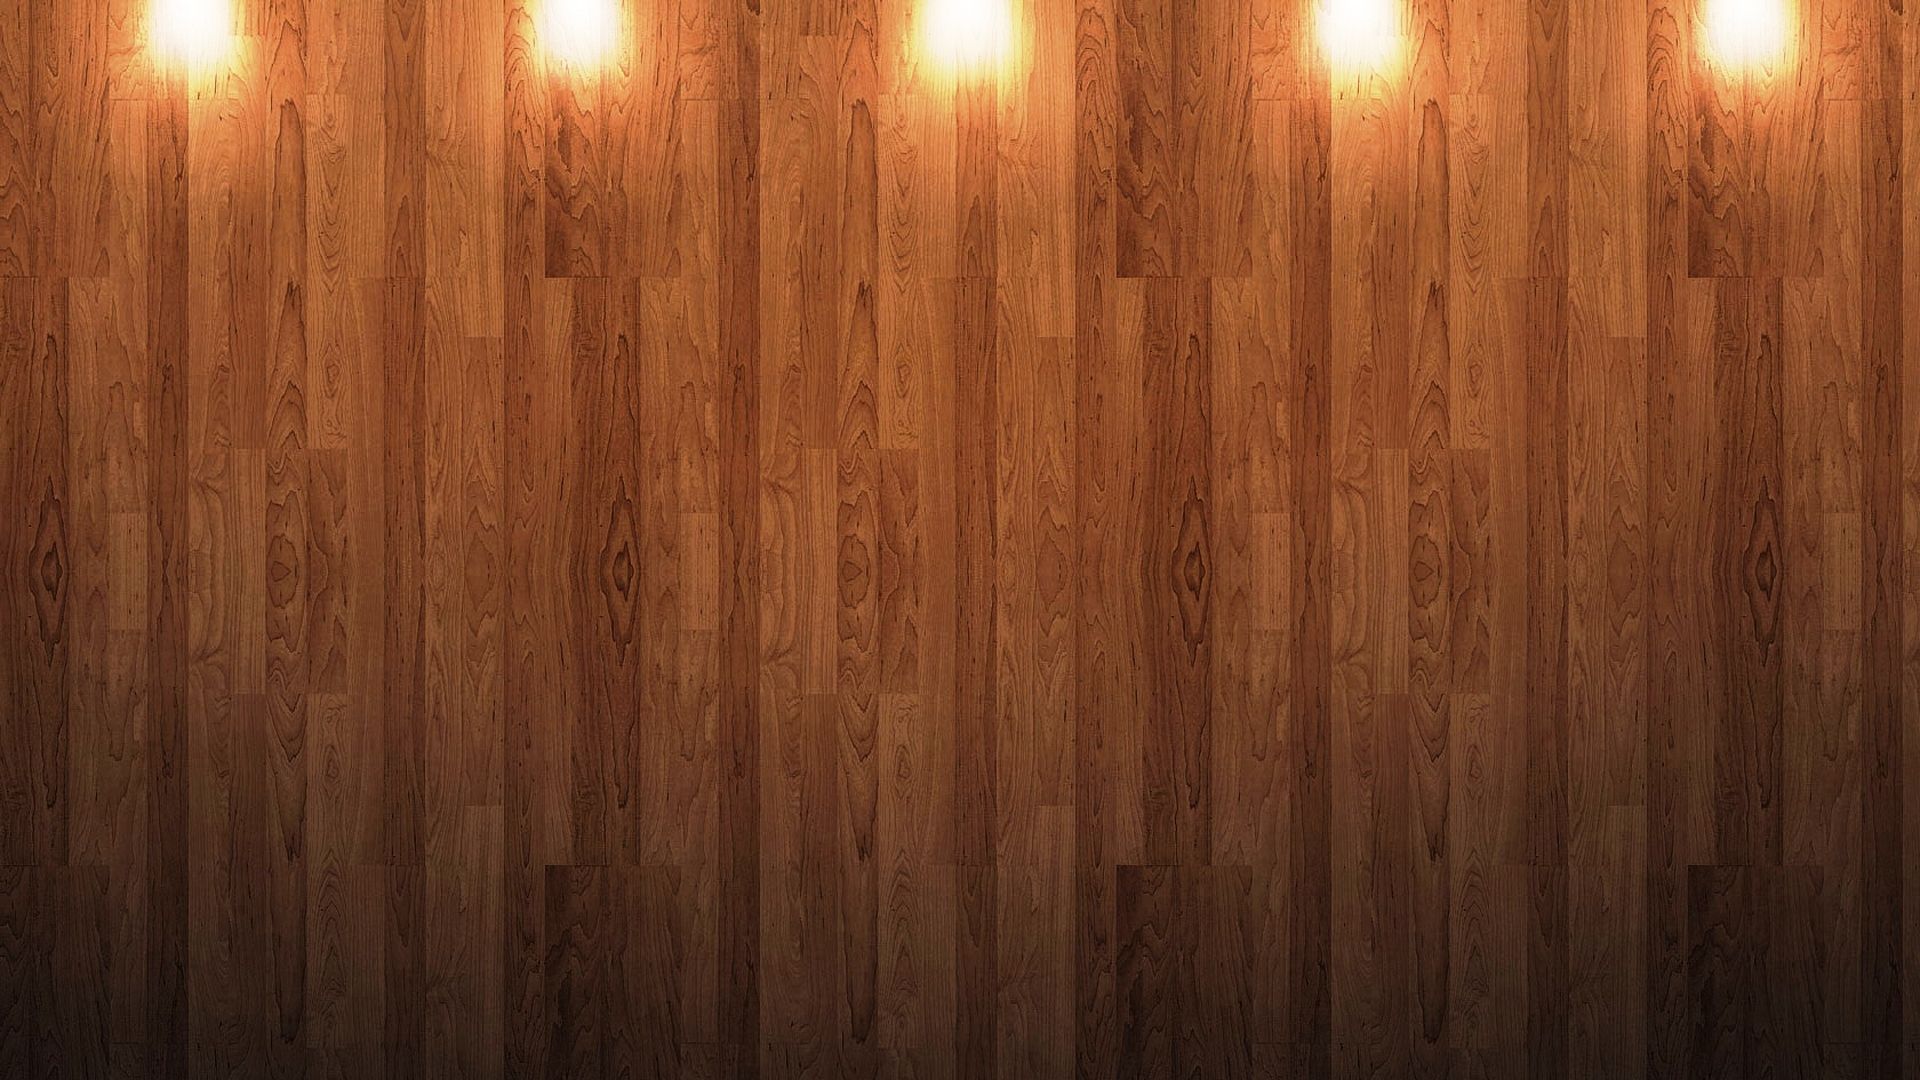 134 Wood HD Wallpapers Backgrounds - Wallpaper Abyss -